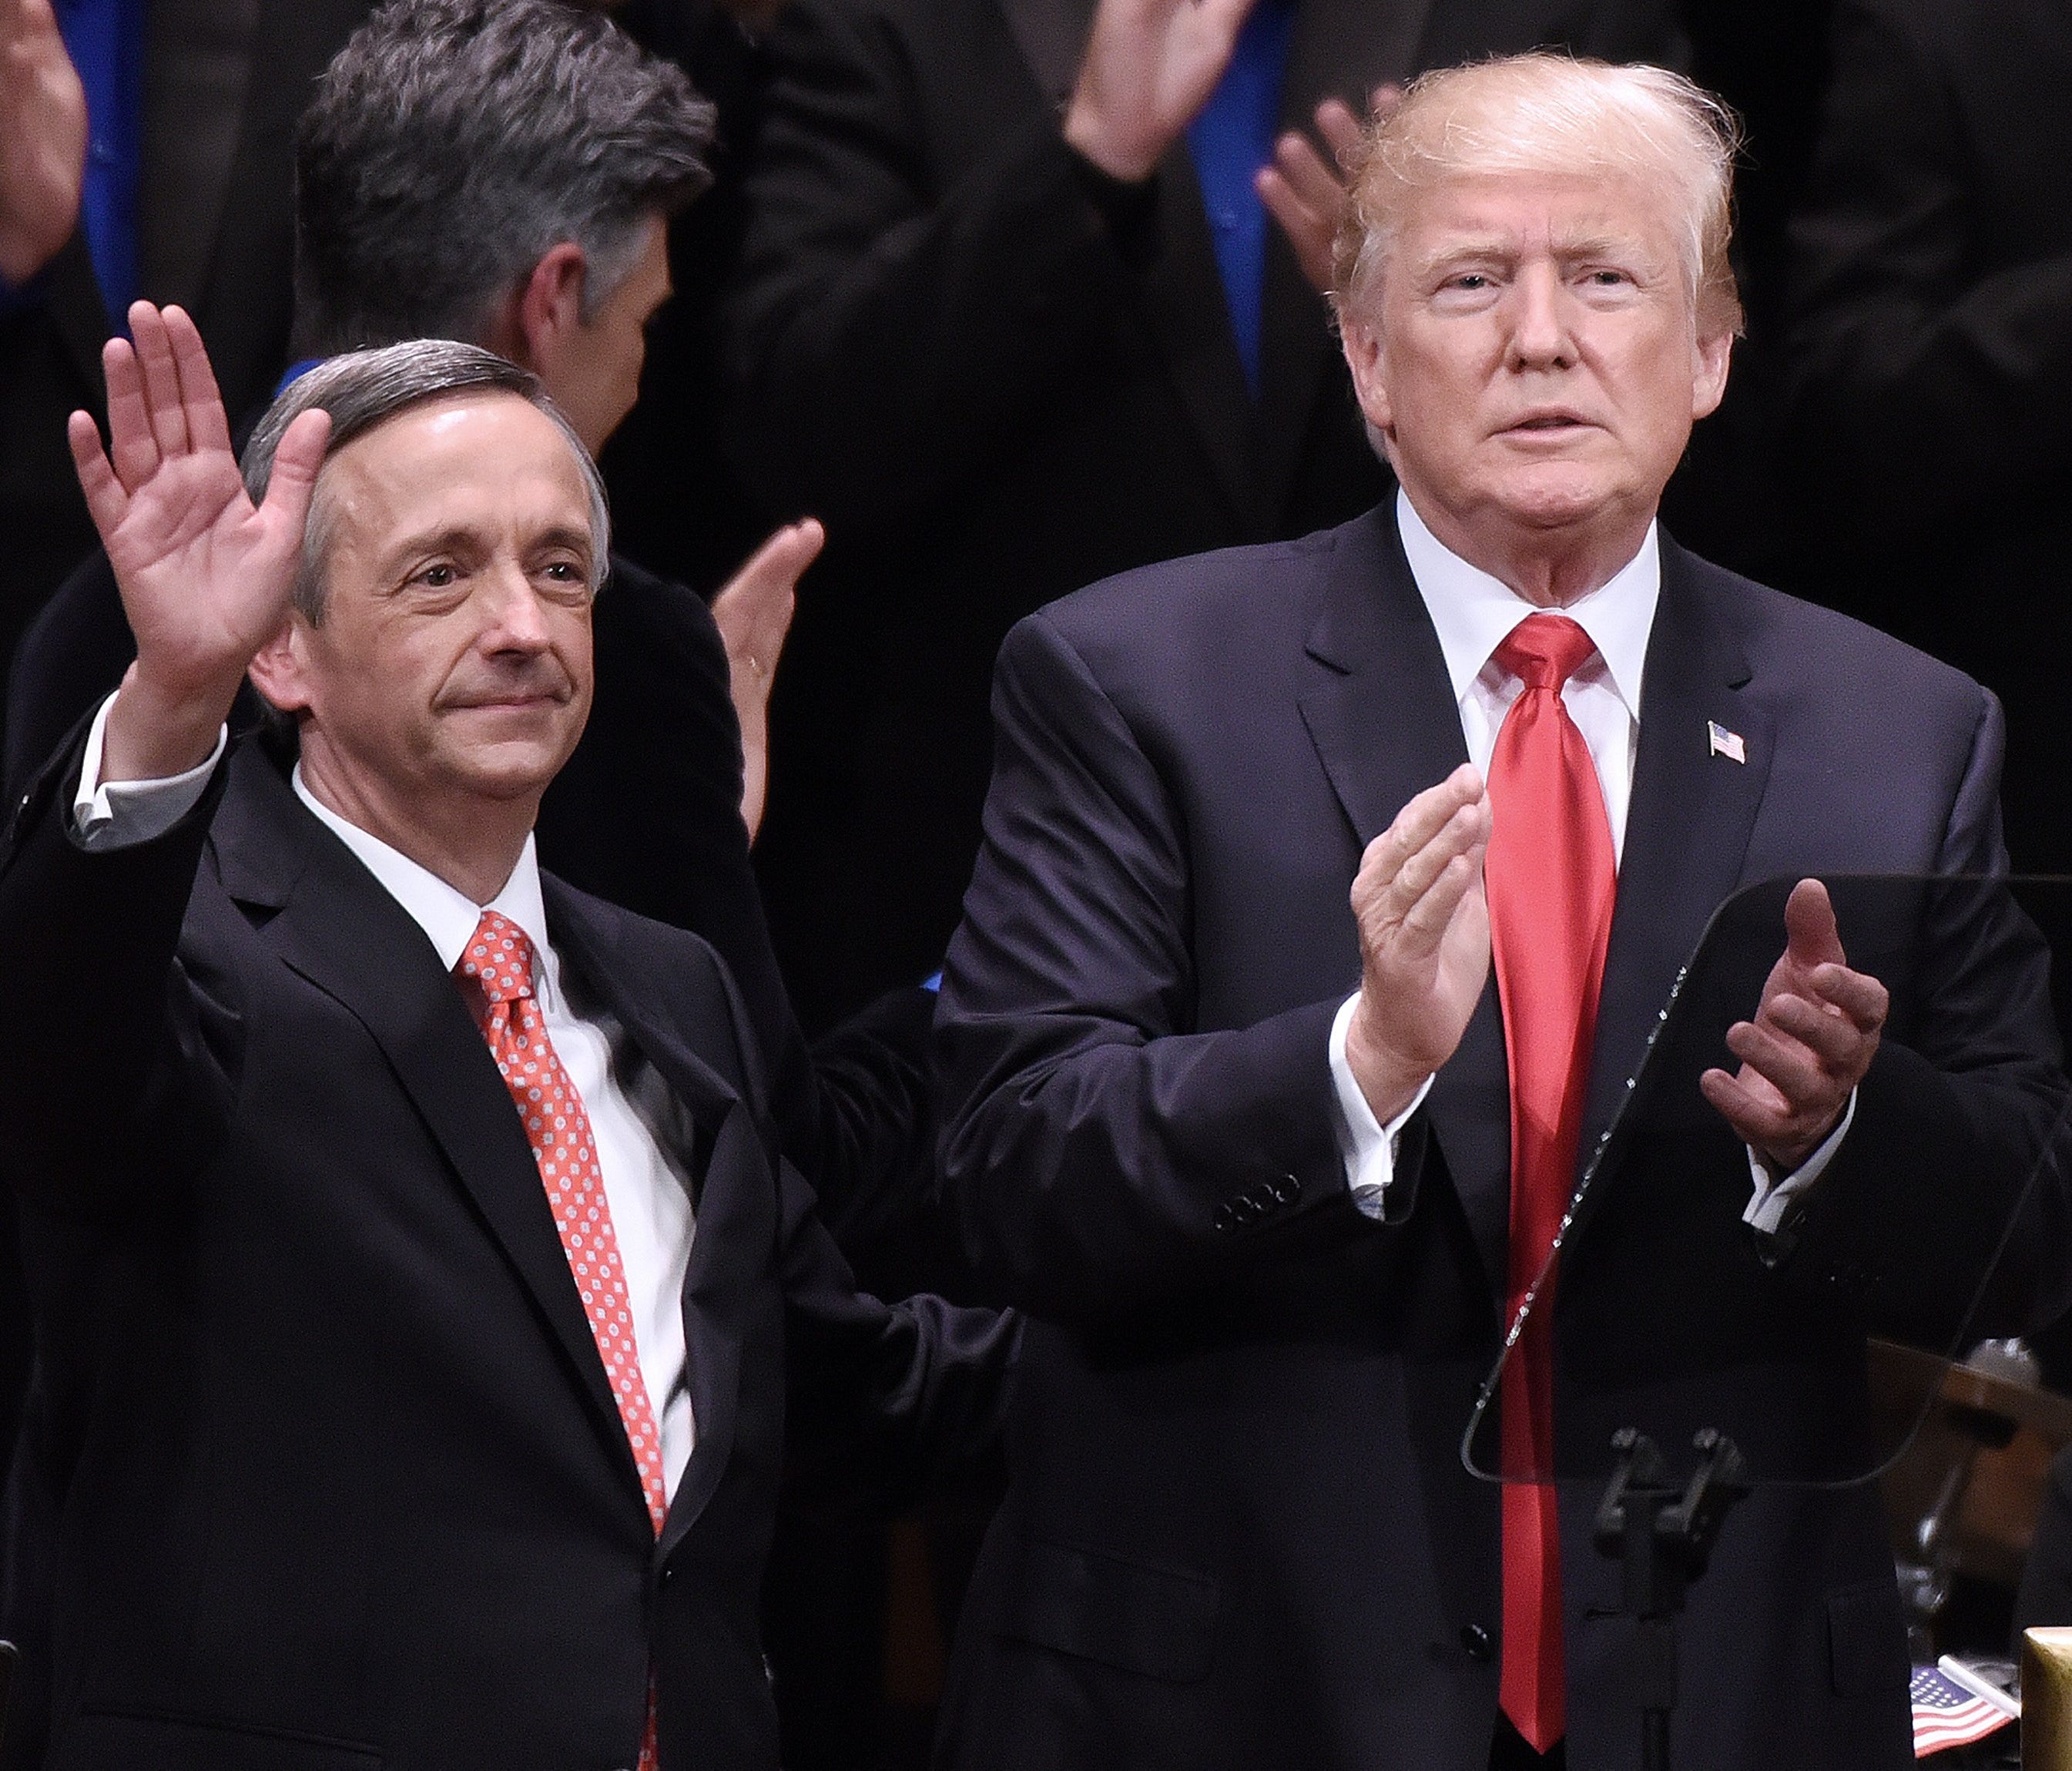 President Trump (right) and past Robert Jeffress (left) are pictured participating in the Celebrate Freedom Rally at the John F. Kennedy Center for the Performing Arts in Washington.